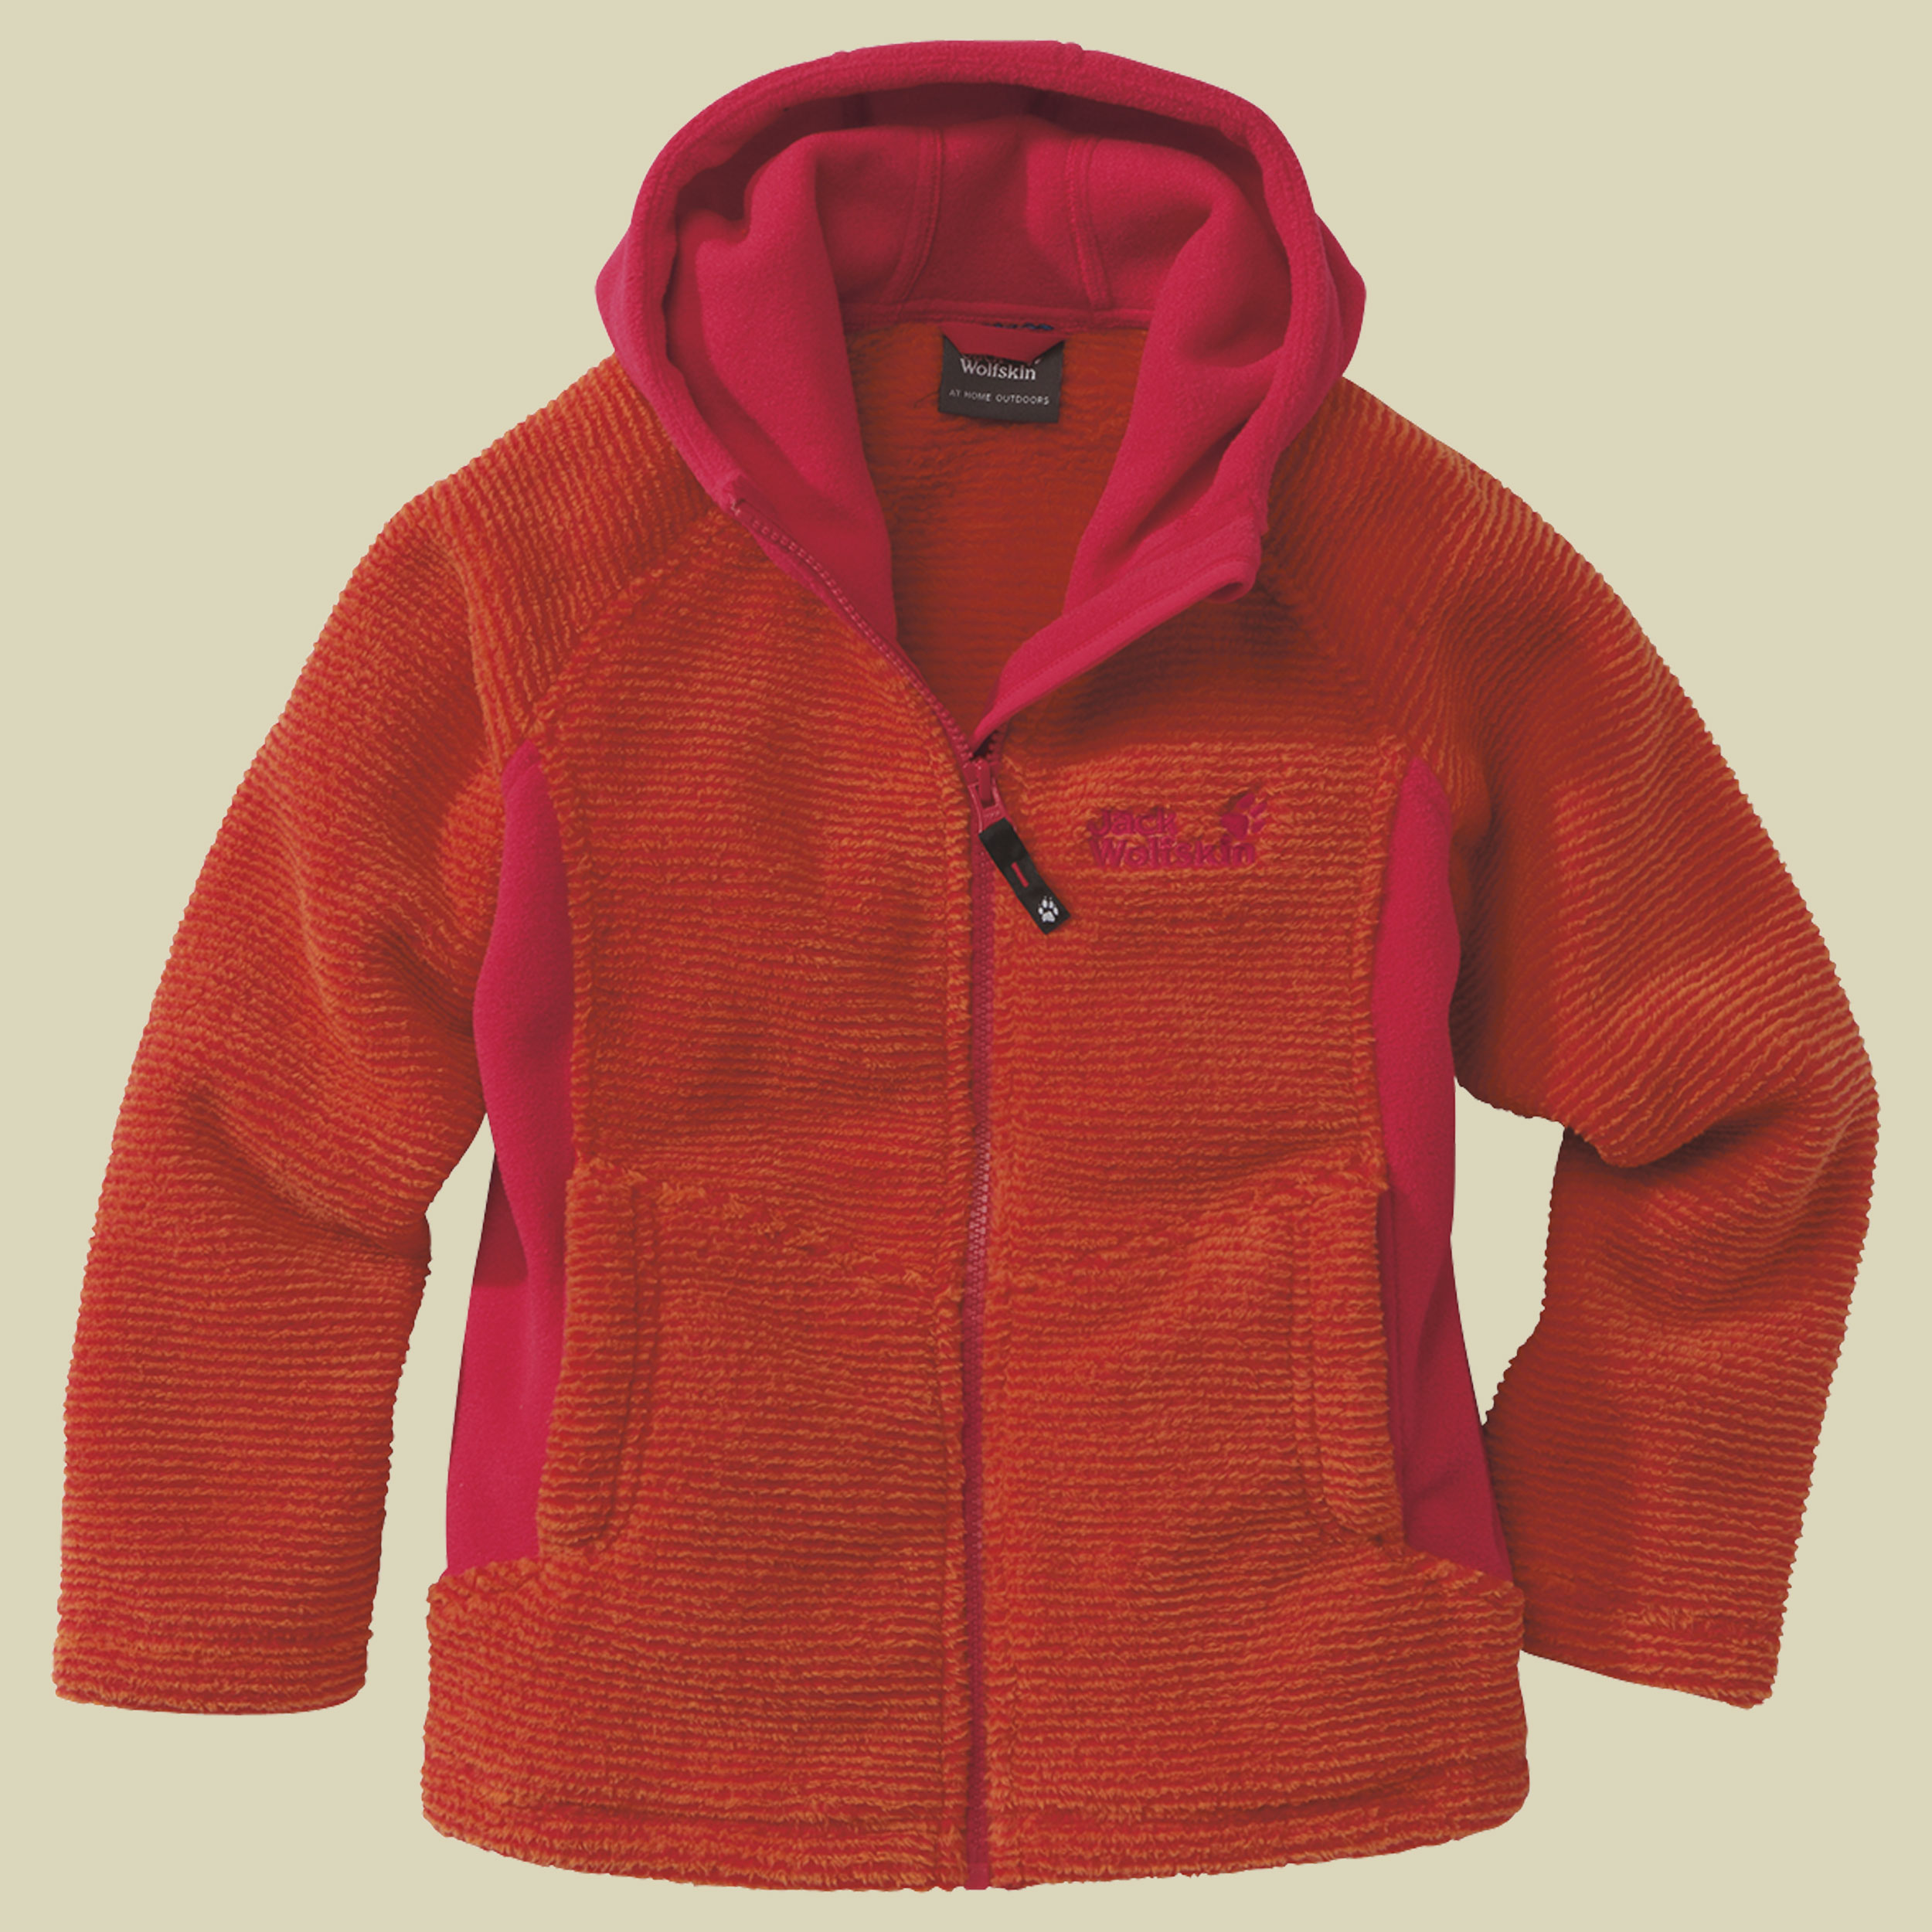 Kids Bumble Bee Jacket Größe 104 Farbe clear red stripes